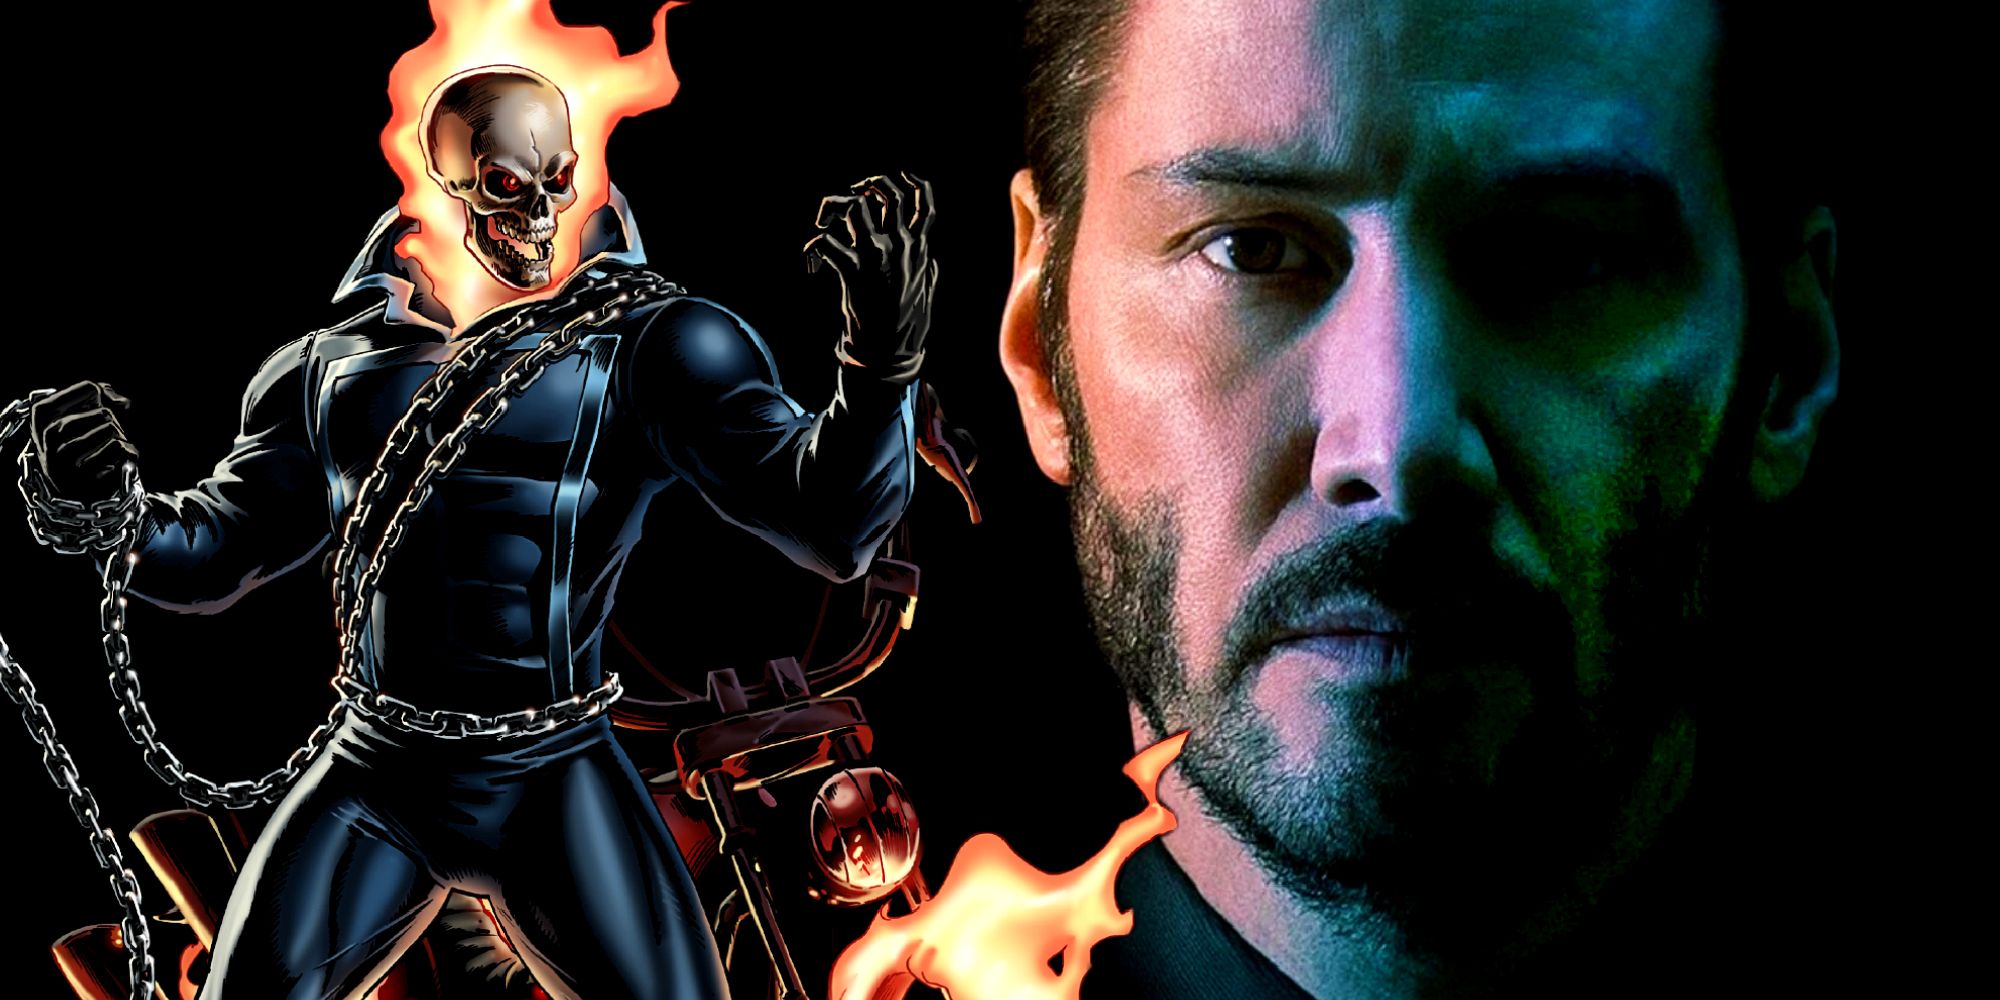 Keanu Reeves as John Wick and Ghost Rider in Marvel Comics